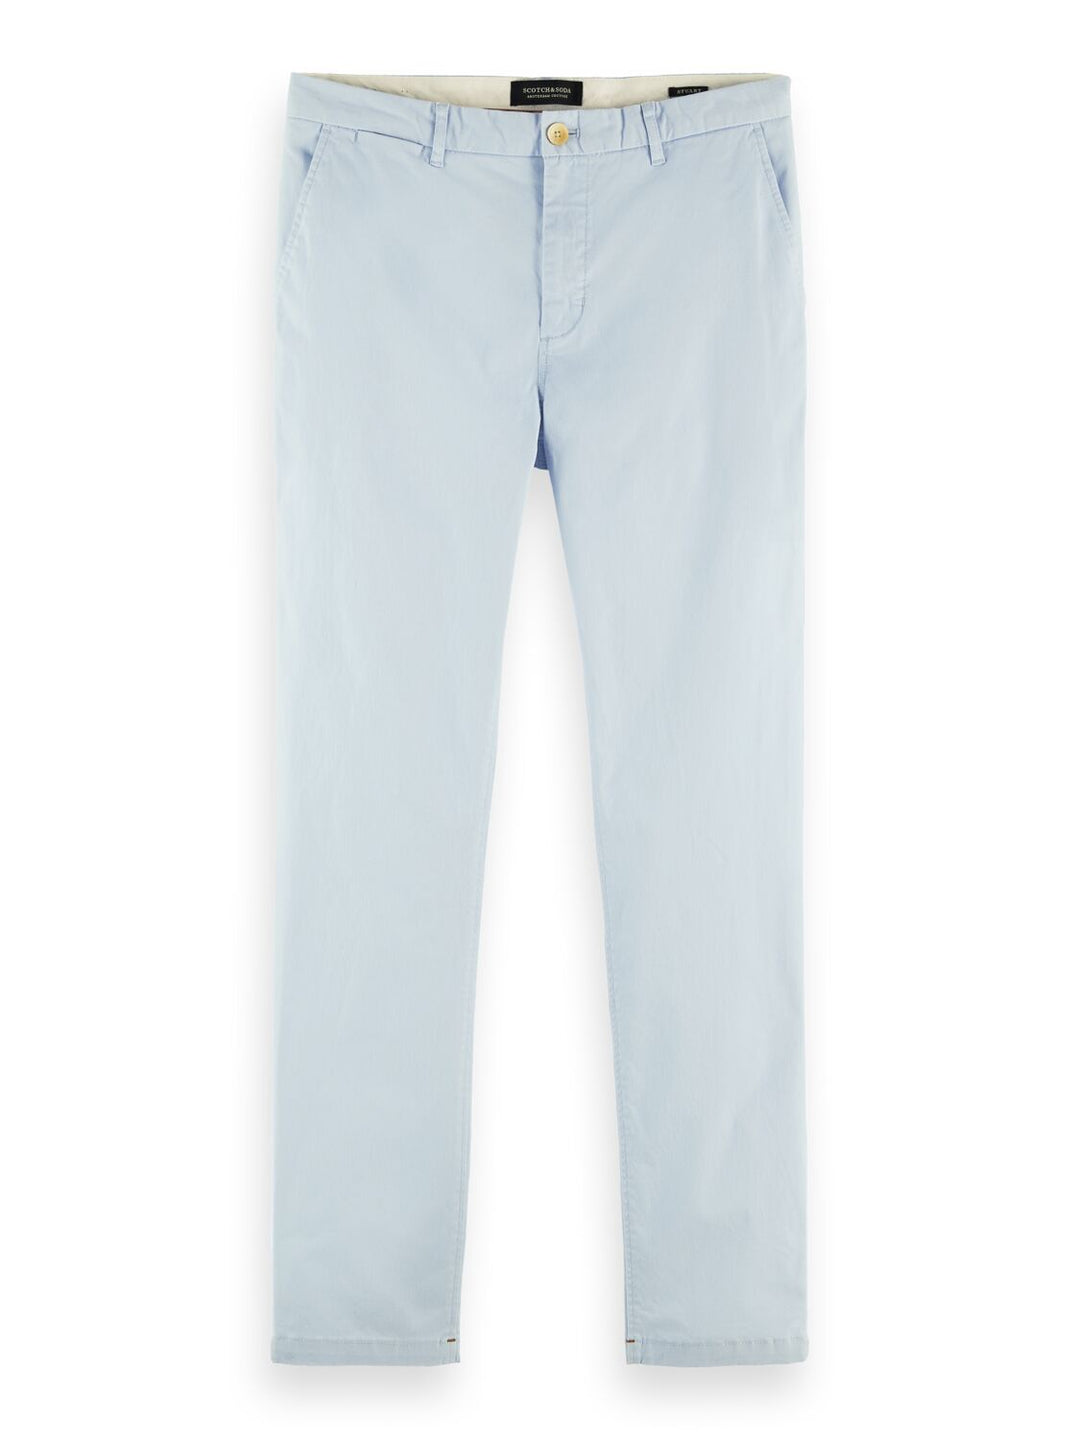 Stuart Classic Twill Chino in Blue | Buster McGee Daylesford